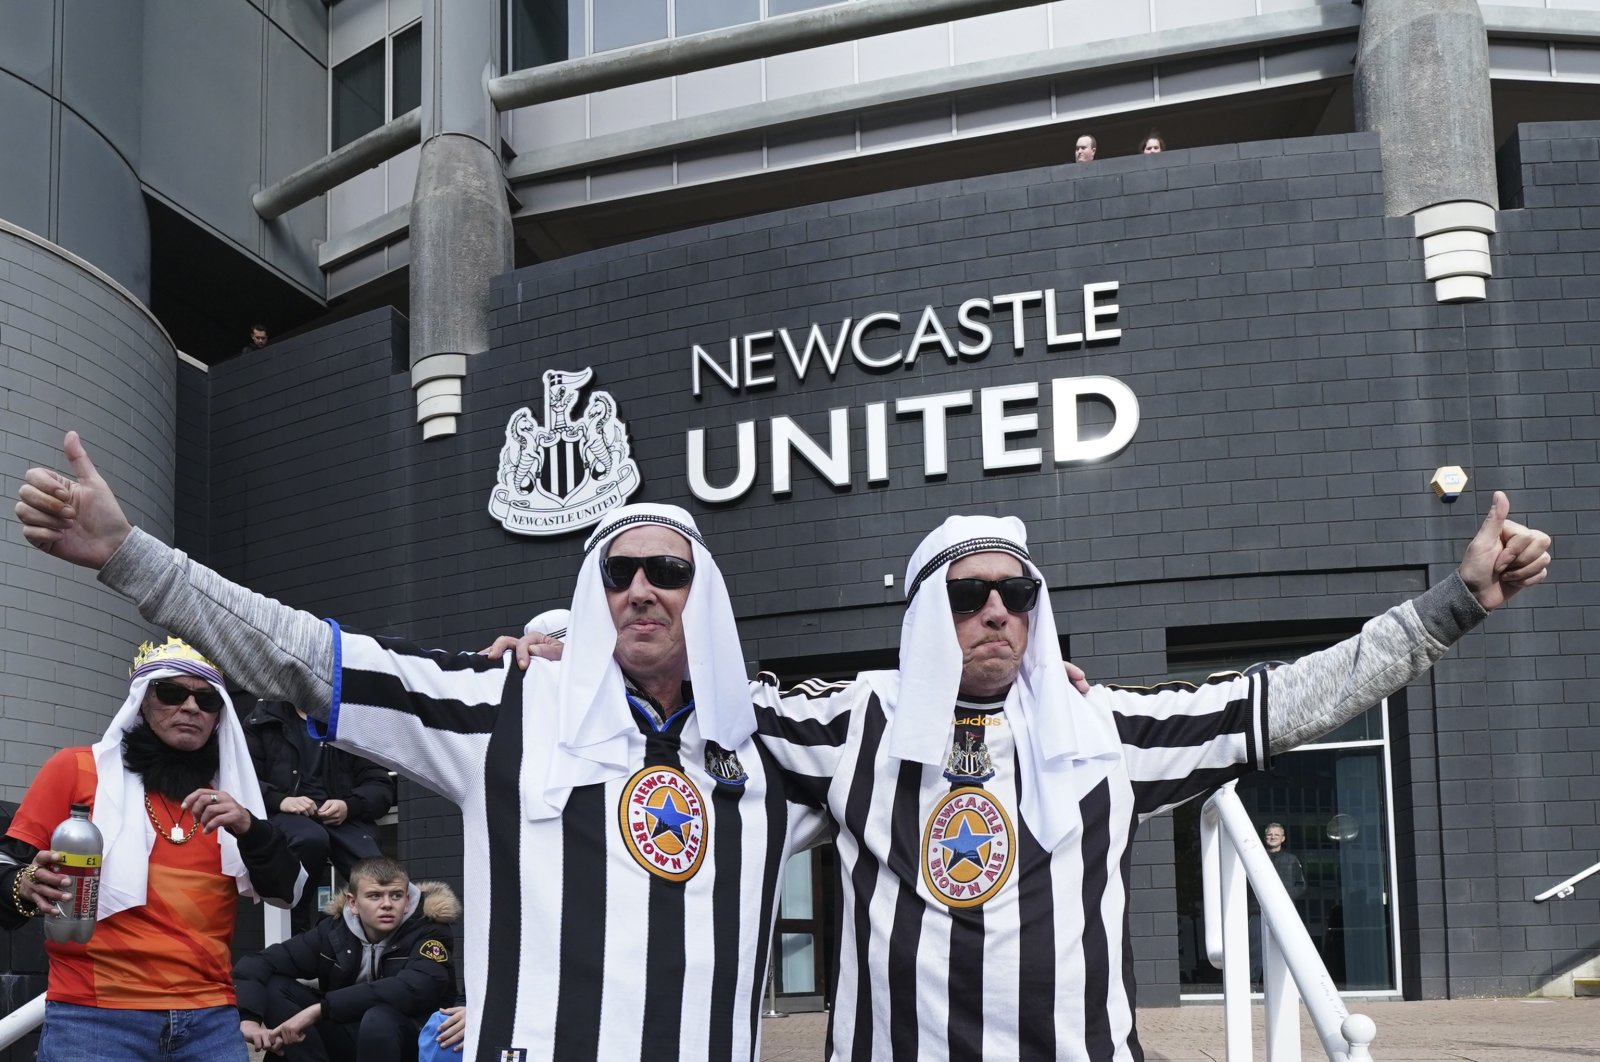 Newcastle fans pose for a photo outside the ground before an English Premier League soccer match between Newcastle and Tottenham Hotspur at St. James' Park in Newcastle, England, Oct. 17, 2021. (AP Photo)